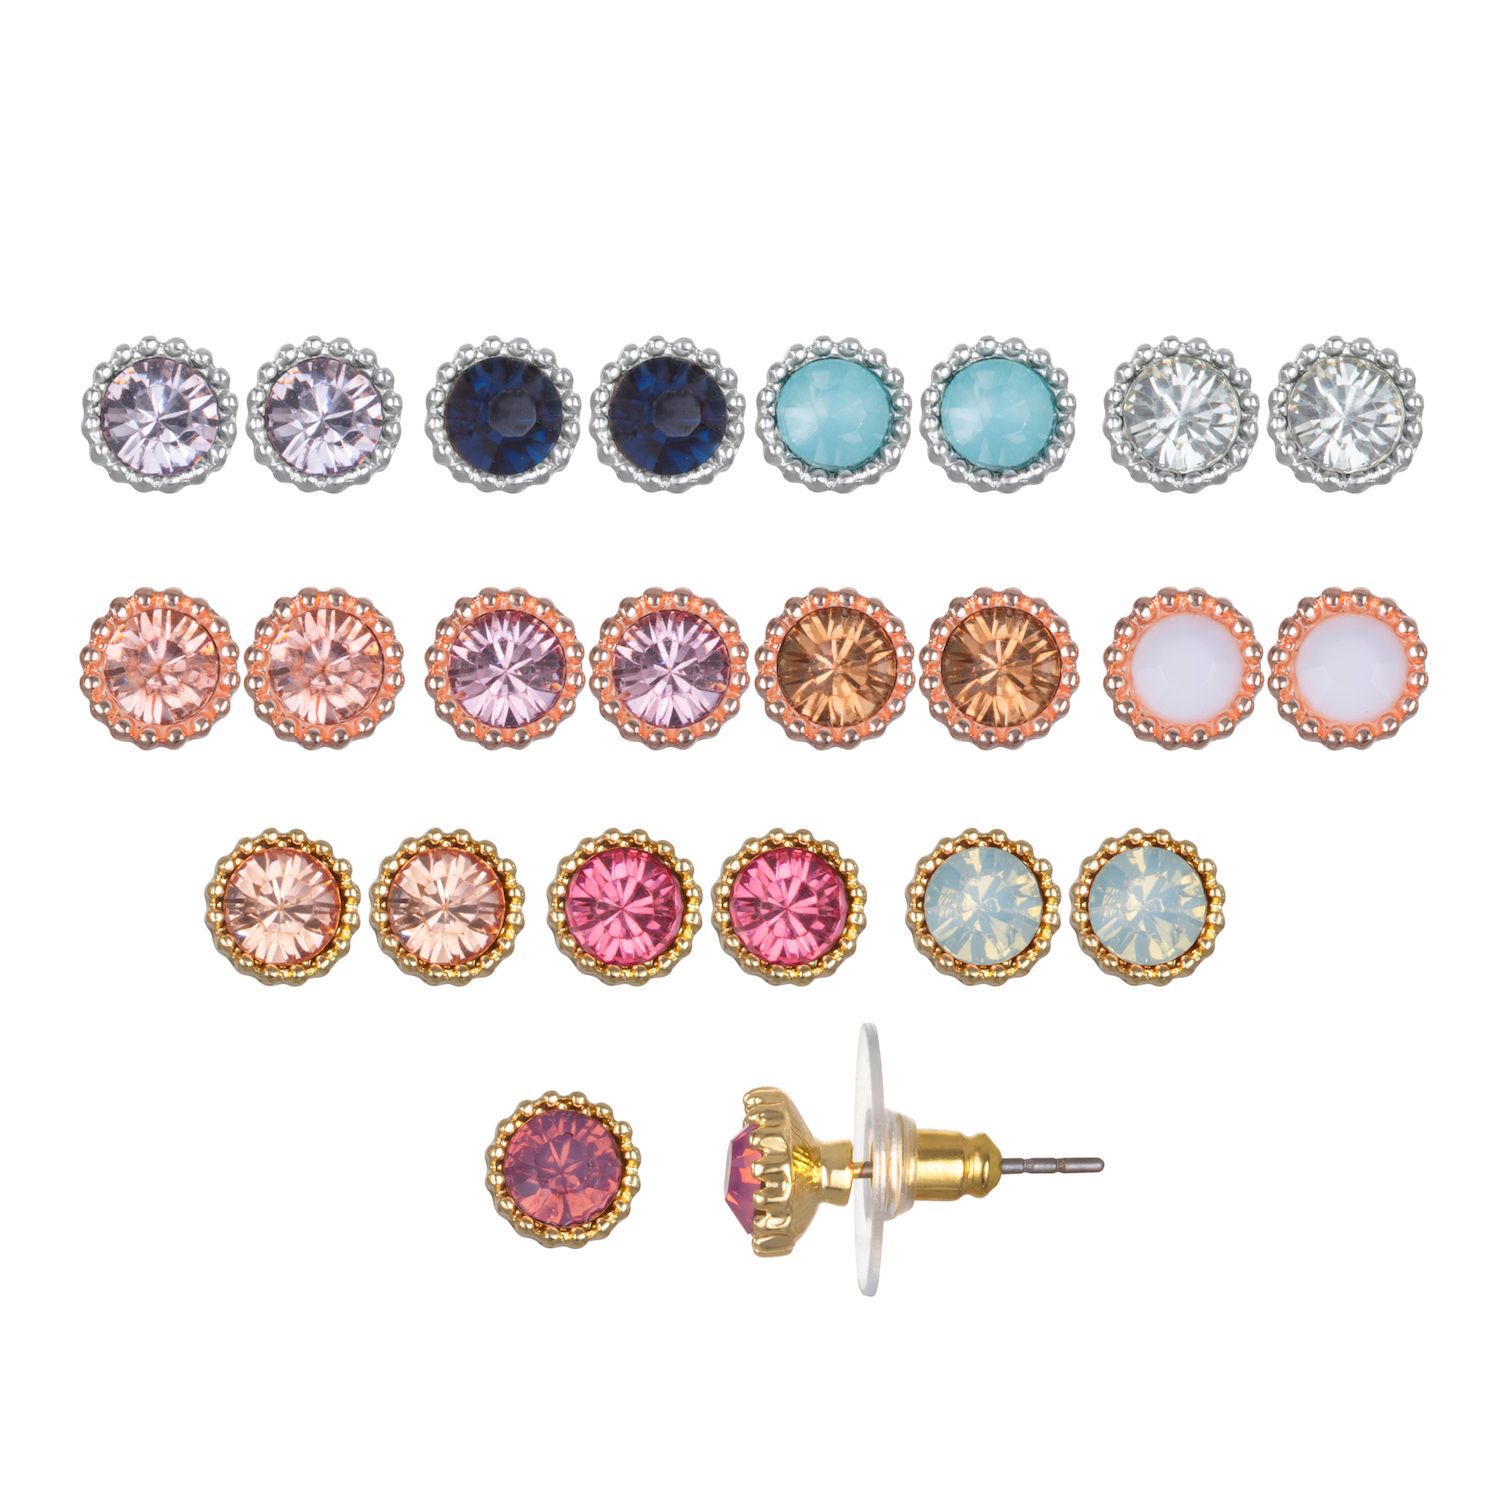 Image for LC Lauren Conrad Tri Tone Simulated Stone Earring Set at Kohl's.